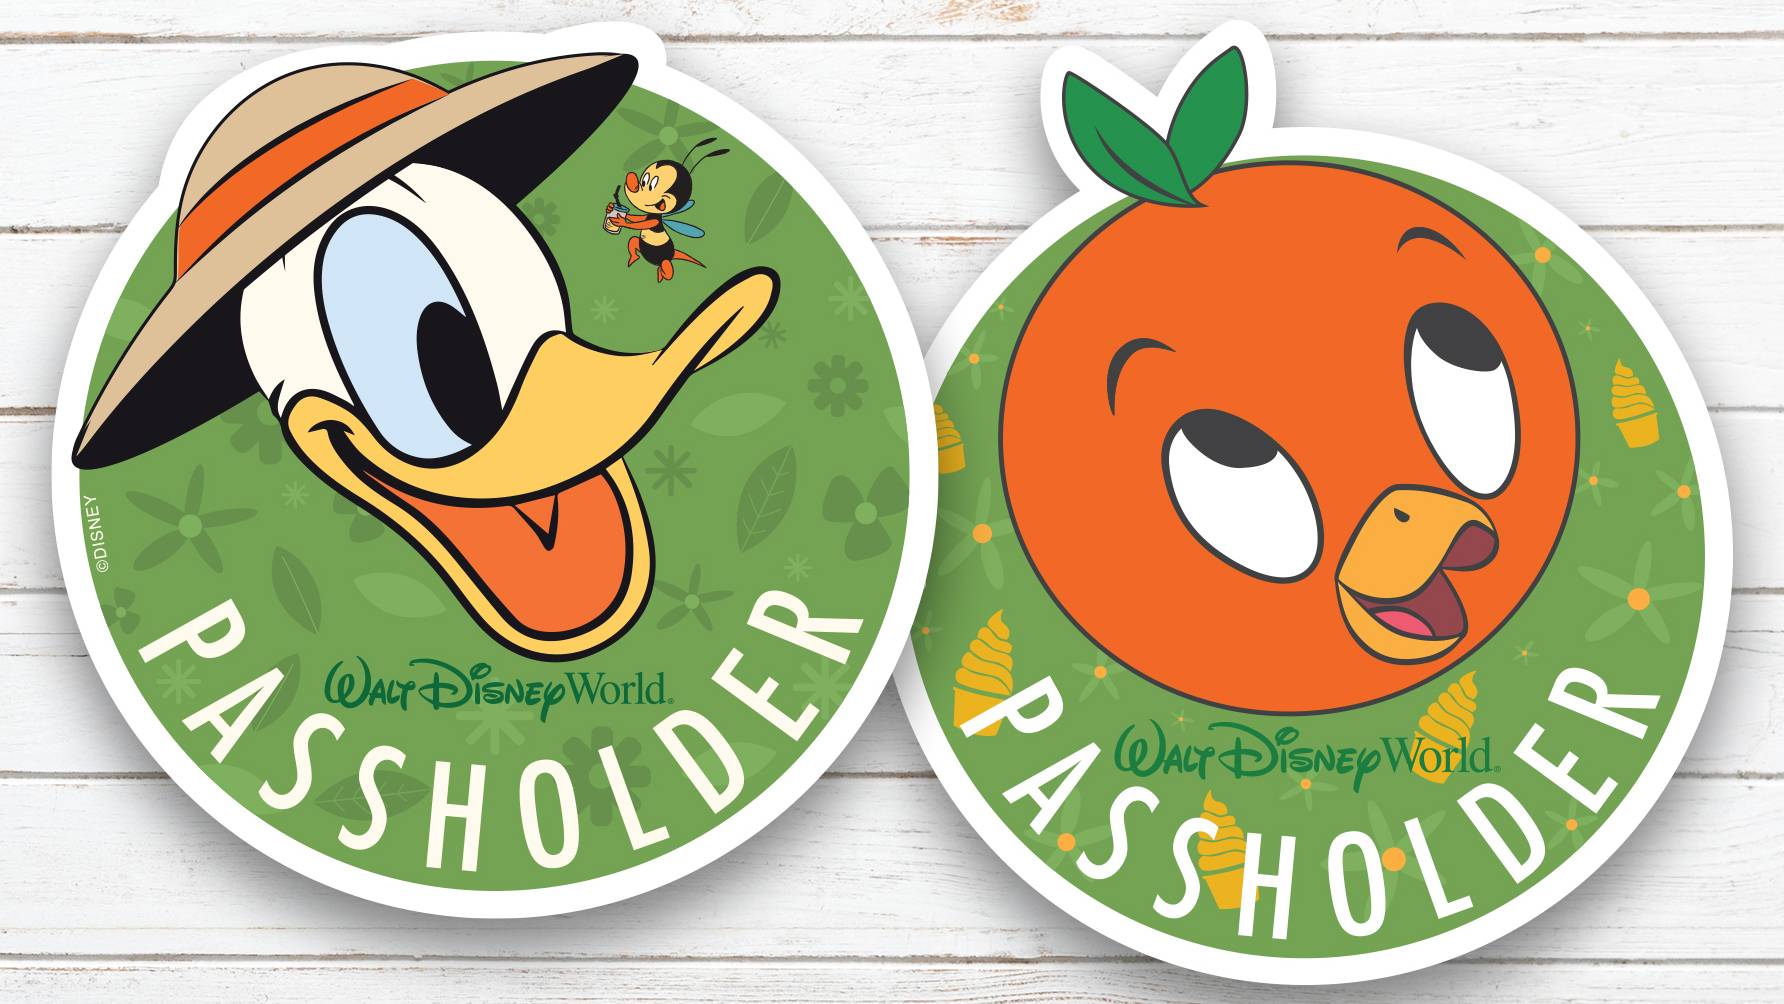 PHOTOS - A look at Passholder magnets and merchandise for the 2020 Epcot Flower and Garden Festival